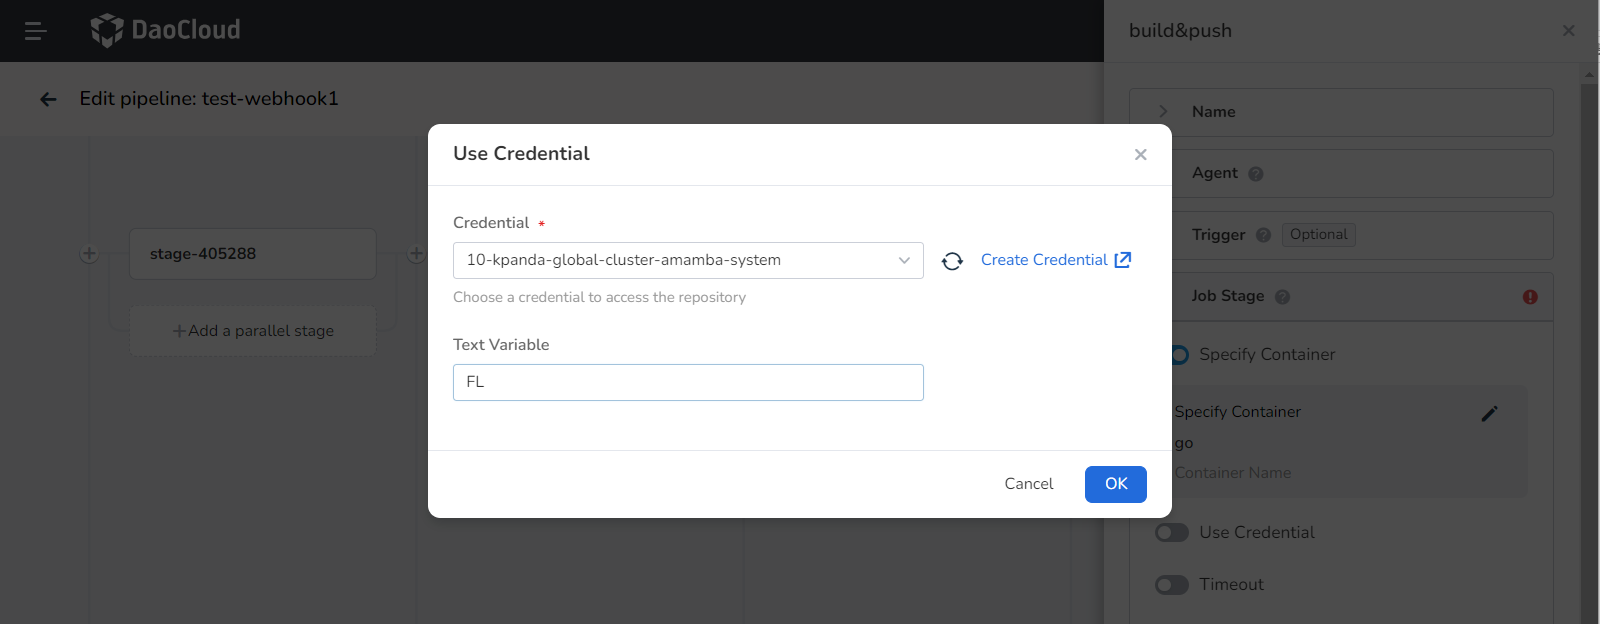 Use Credential01